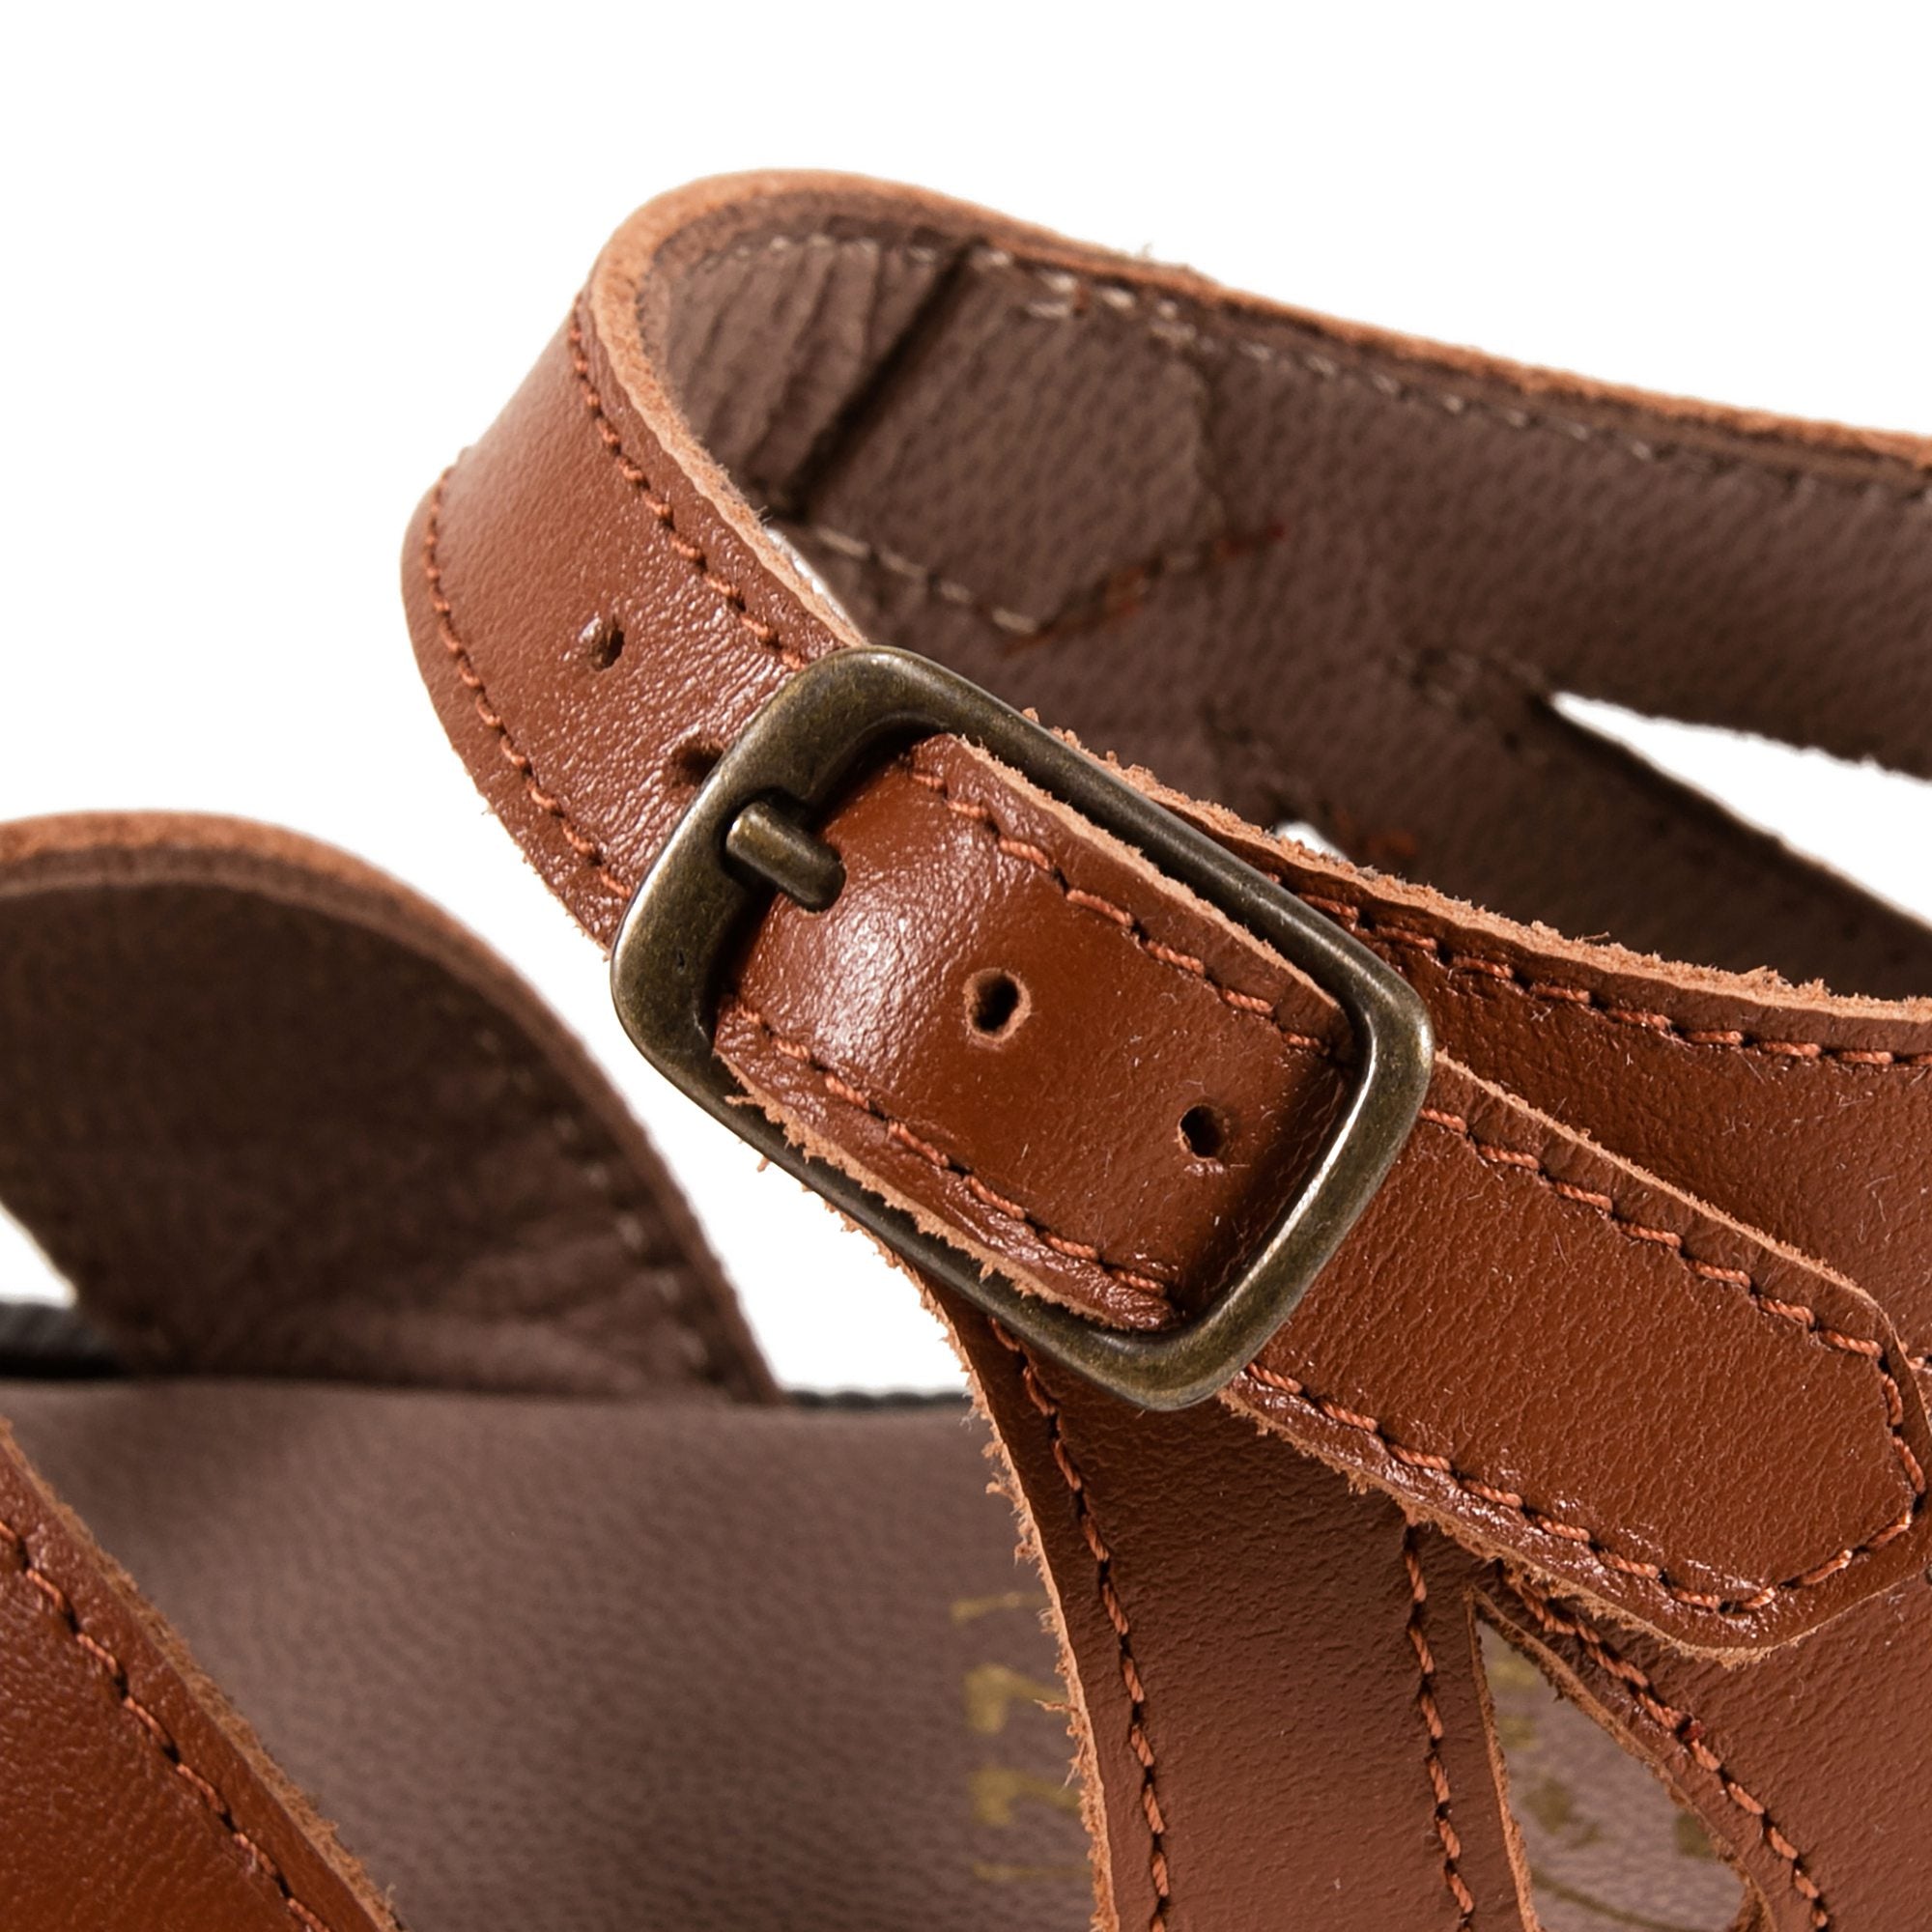 Boys Brown Leather Sandals